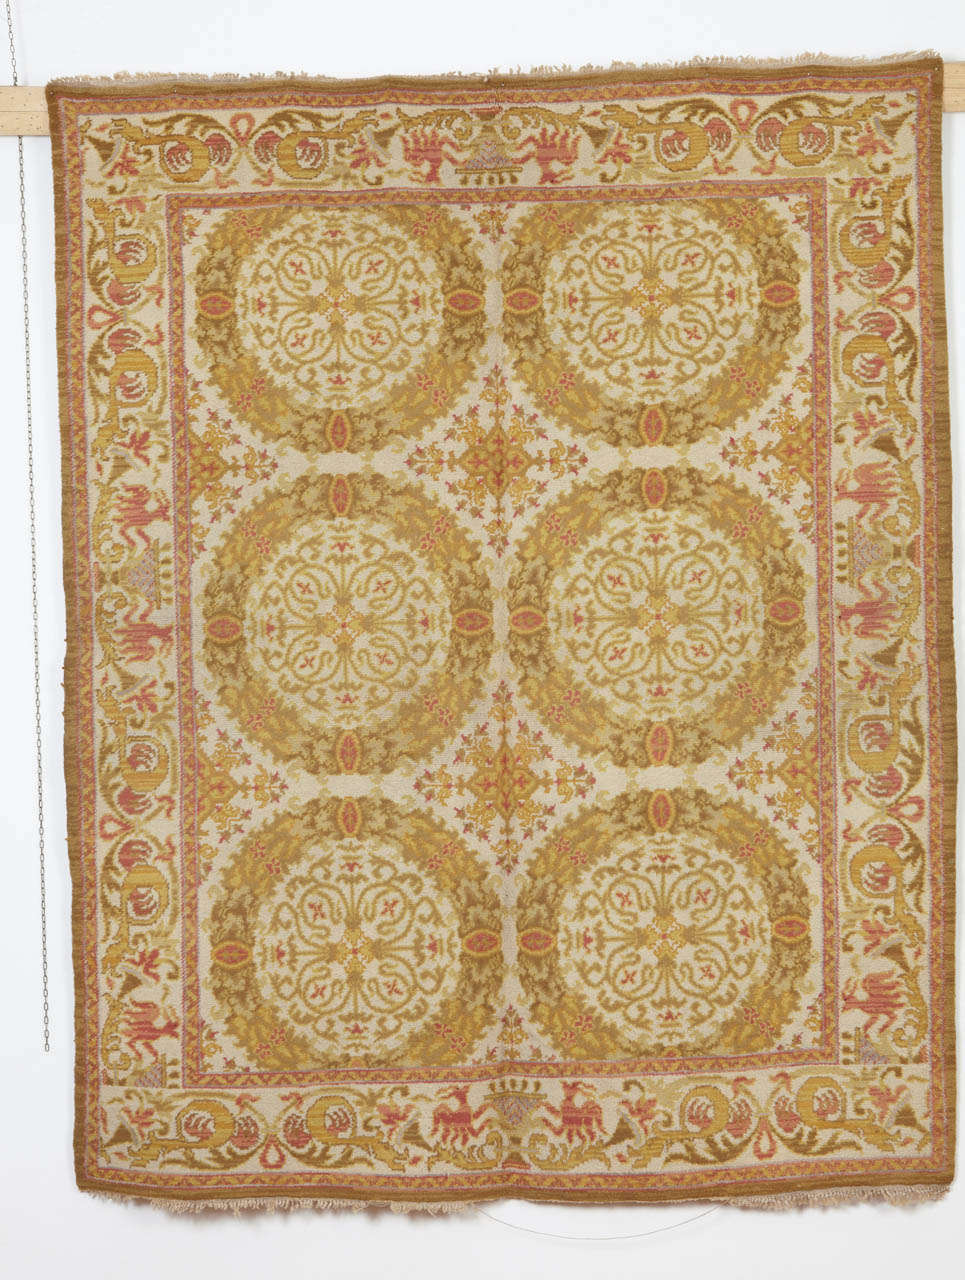 The court workshop called 'Real Fabrica de Tapices' has been active in Madrid since the 17th century, supplying handmade carpets woven with Turkish (symmetrical) knots to both the court as well as for export.
Throughout the 20th century their